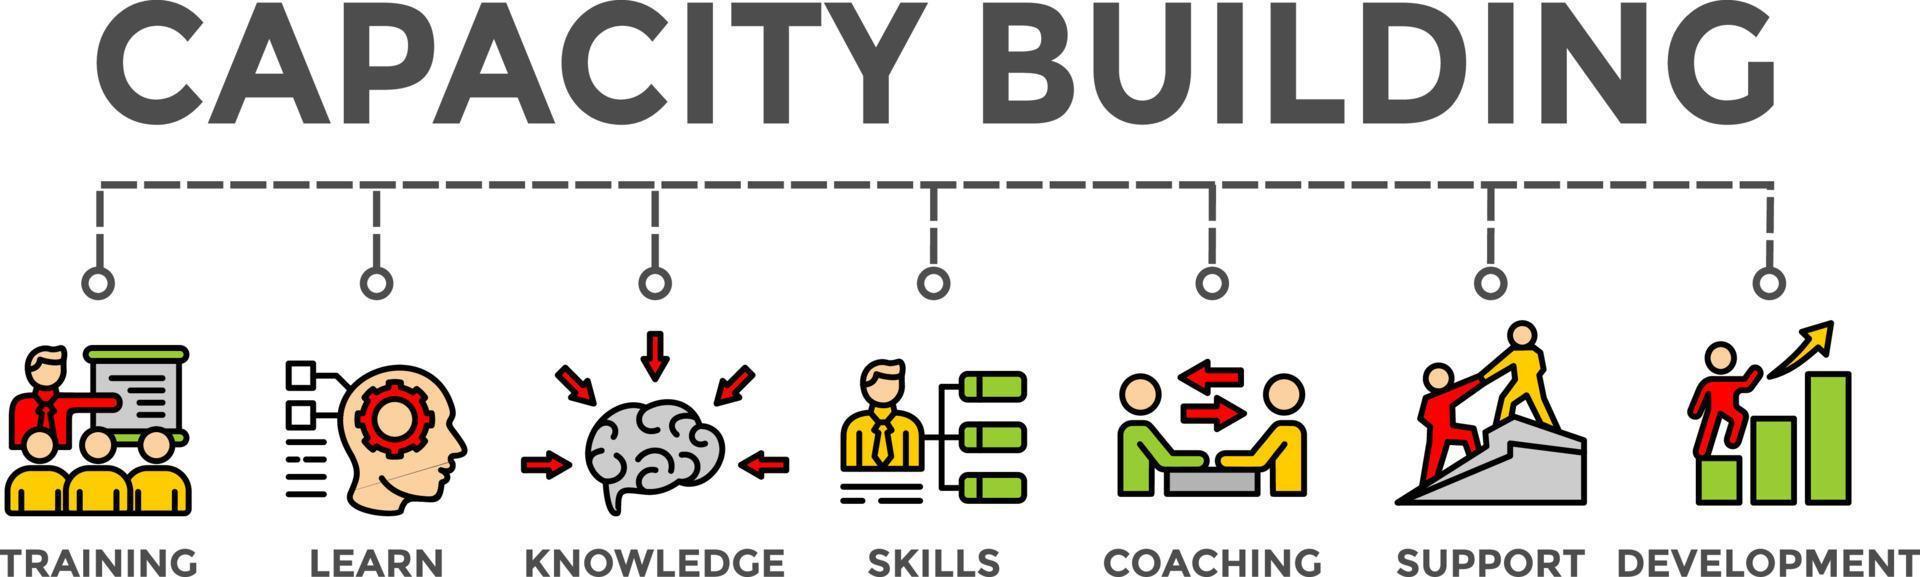 Capacity Building Banner Vector Illustration with learn knowledge skills training development support coaching icons